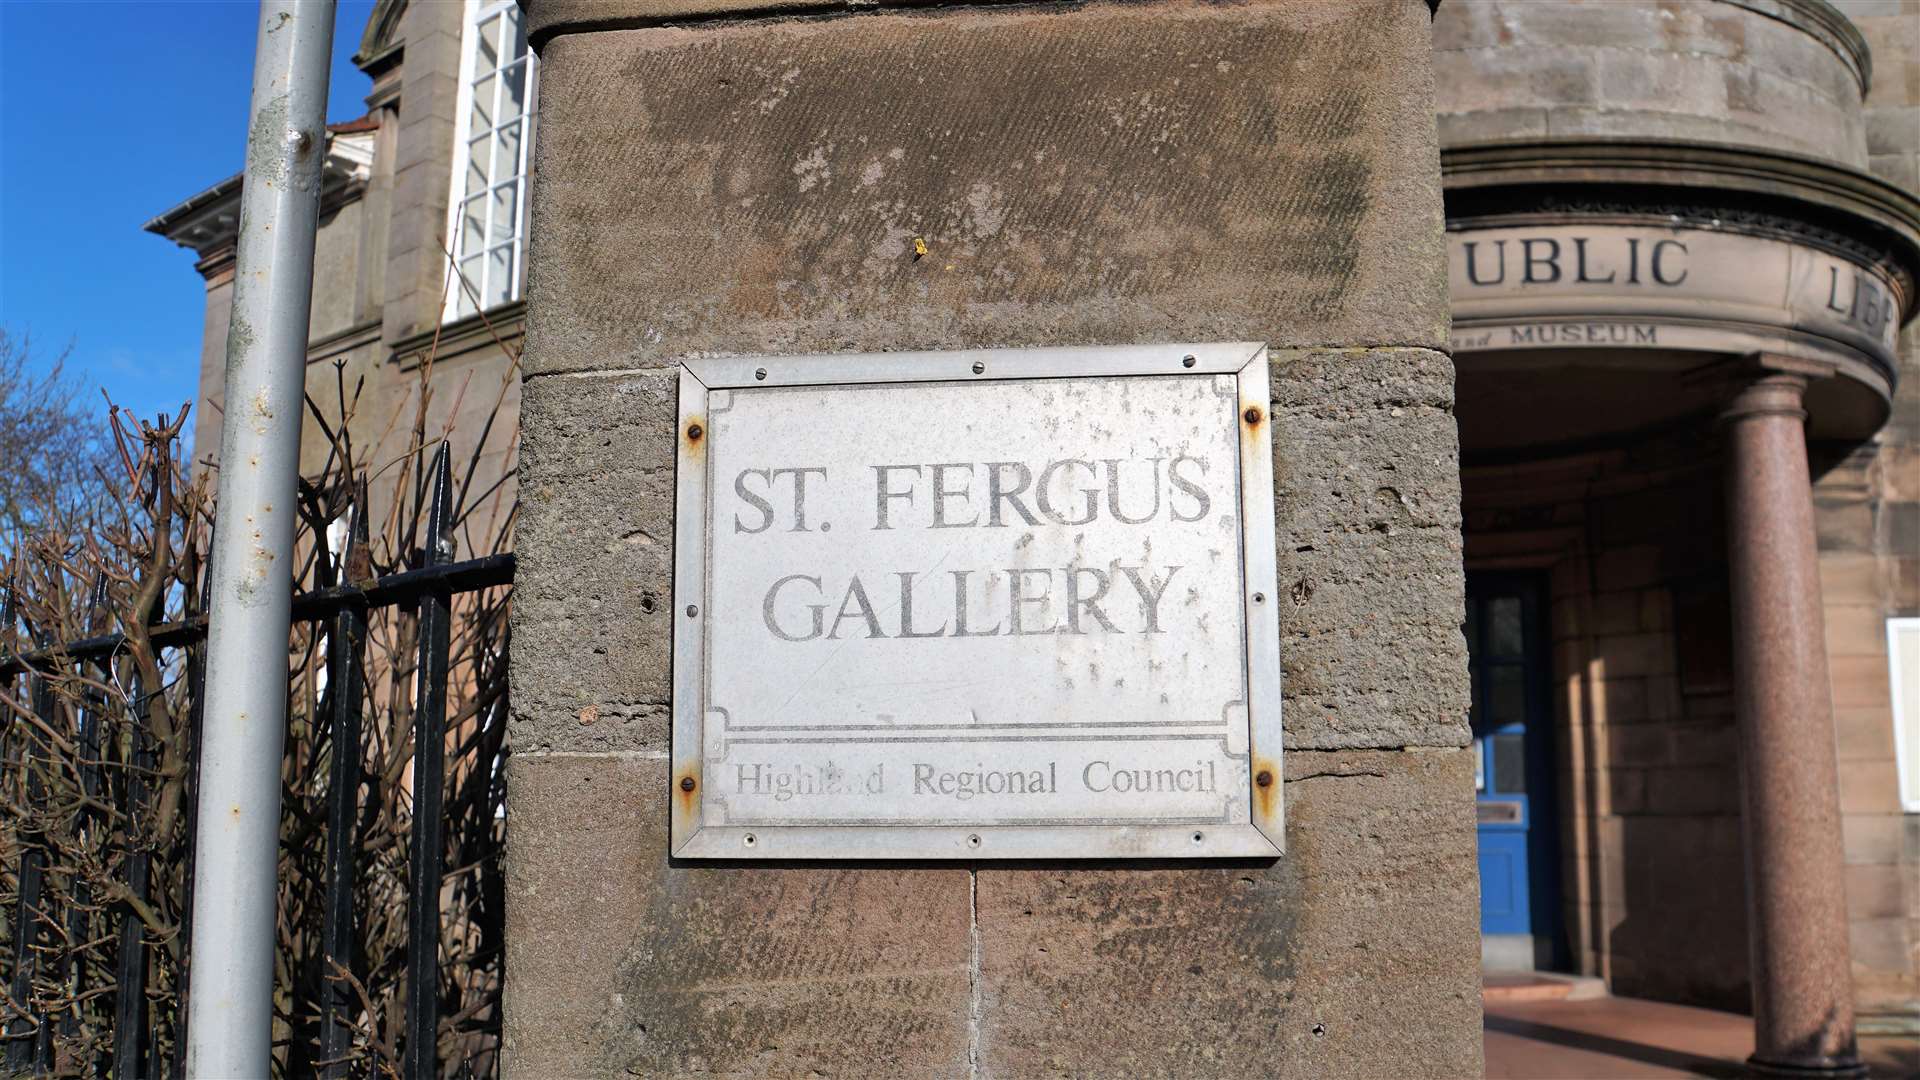 An outdated and tarnished sign for the gallery many thought had already closed.